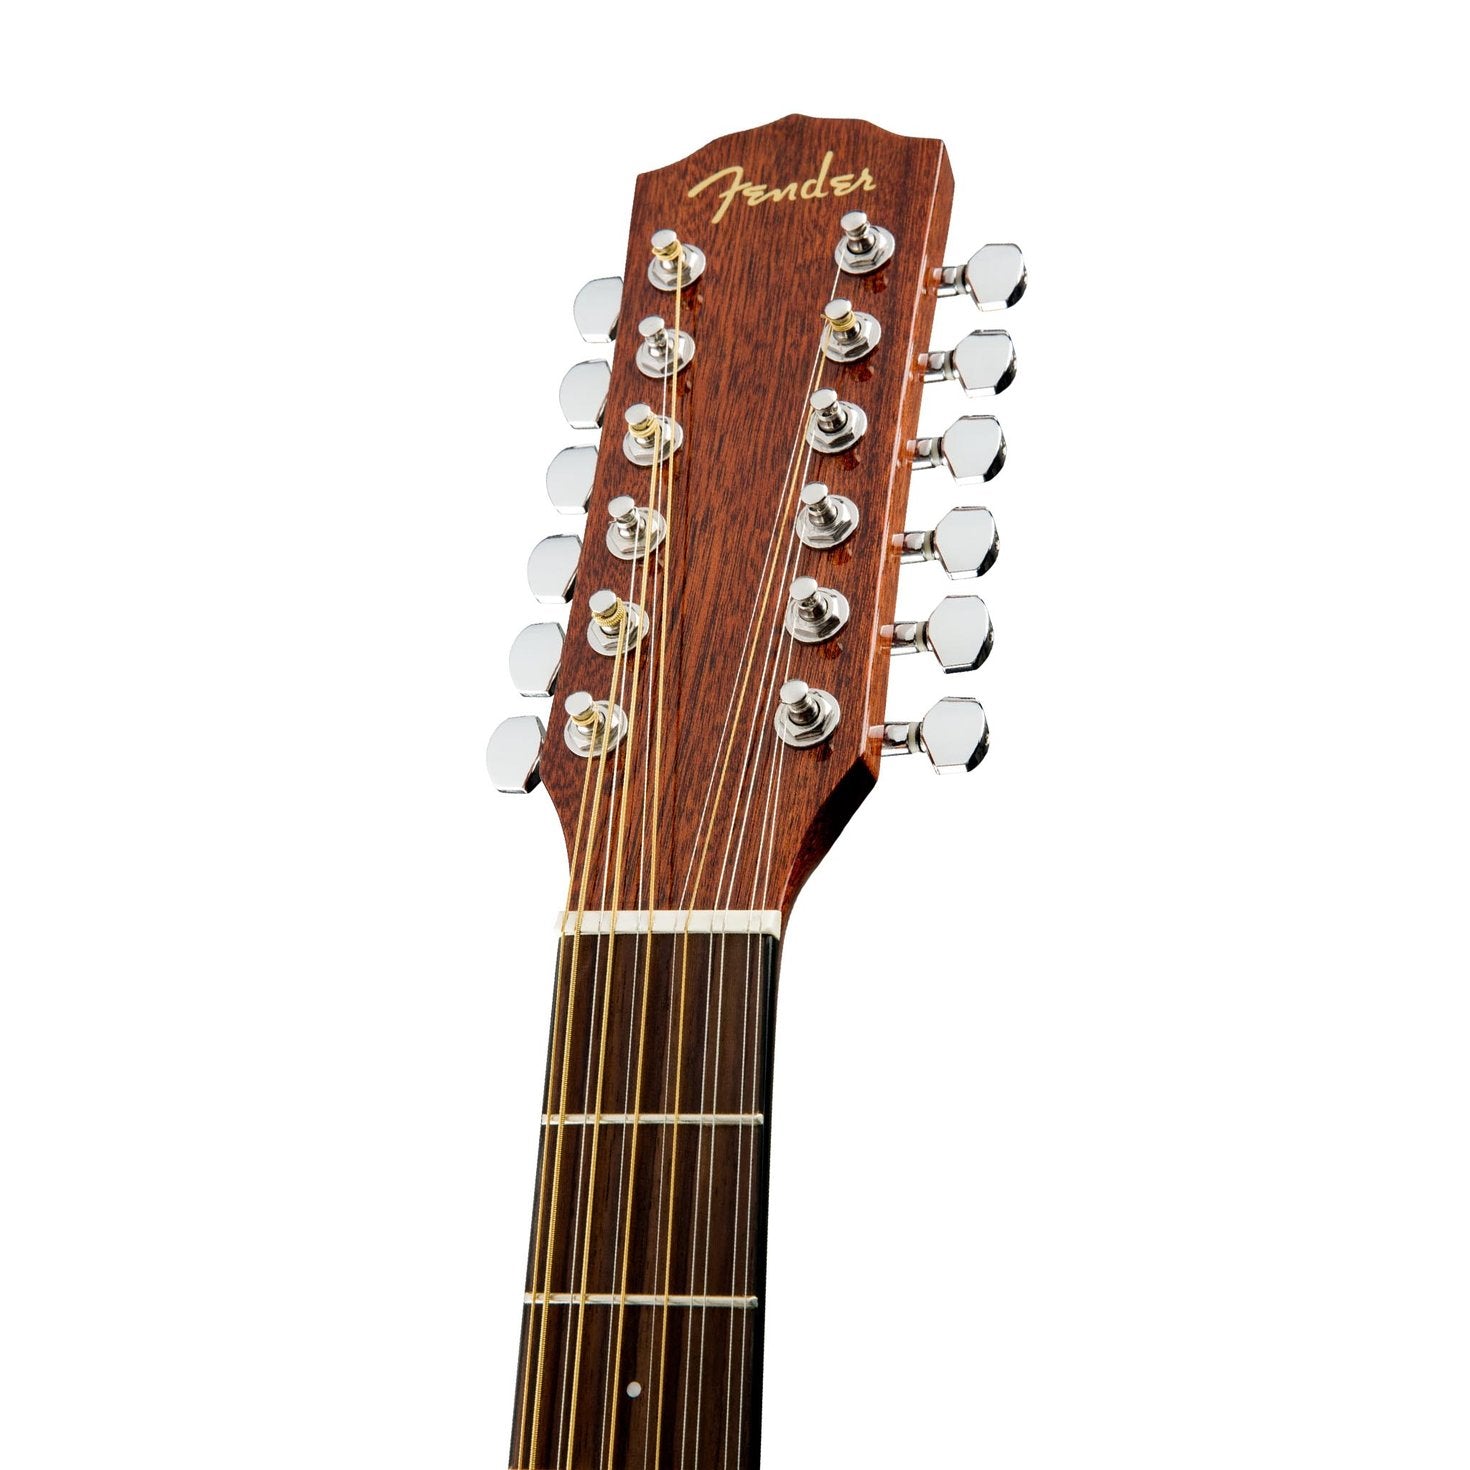 Fender CD-60SCE Dreadnought 12-string Acoustic Guitar, Walnut FB, Natural, FENDER, ACOUSTIC GUITAR, fender-acoustic-guitar-f03-097-0193-021, ZOSO MUSIC SDN BHD